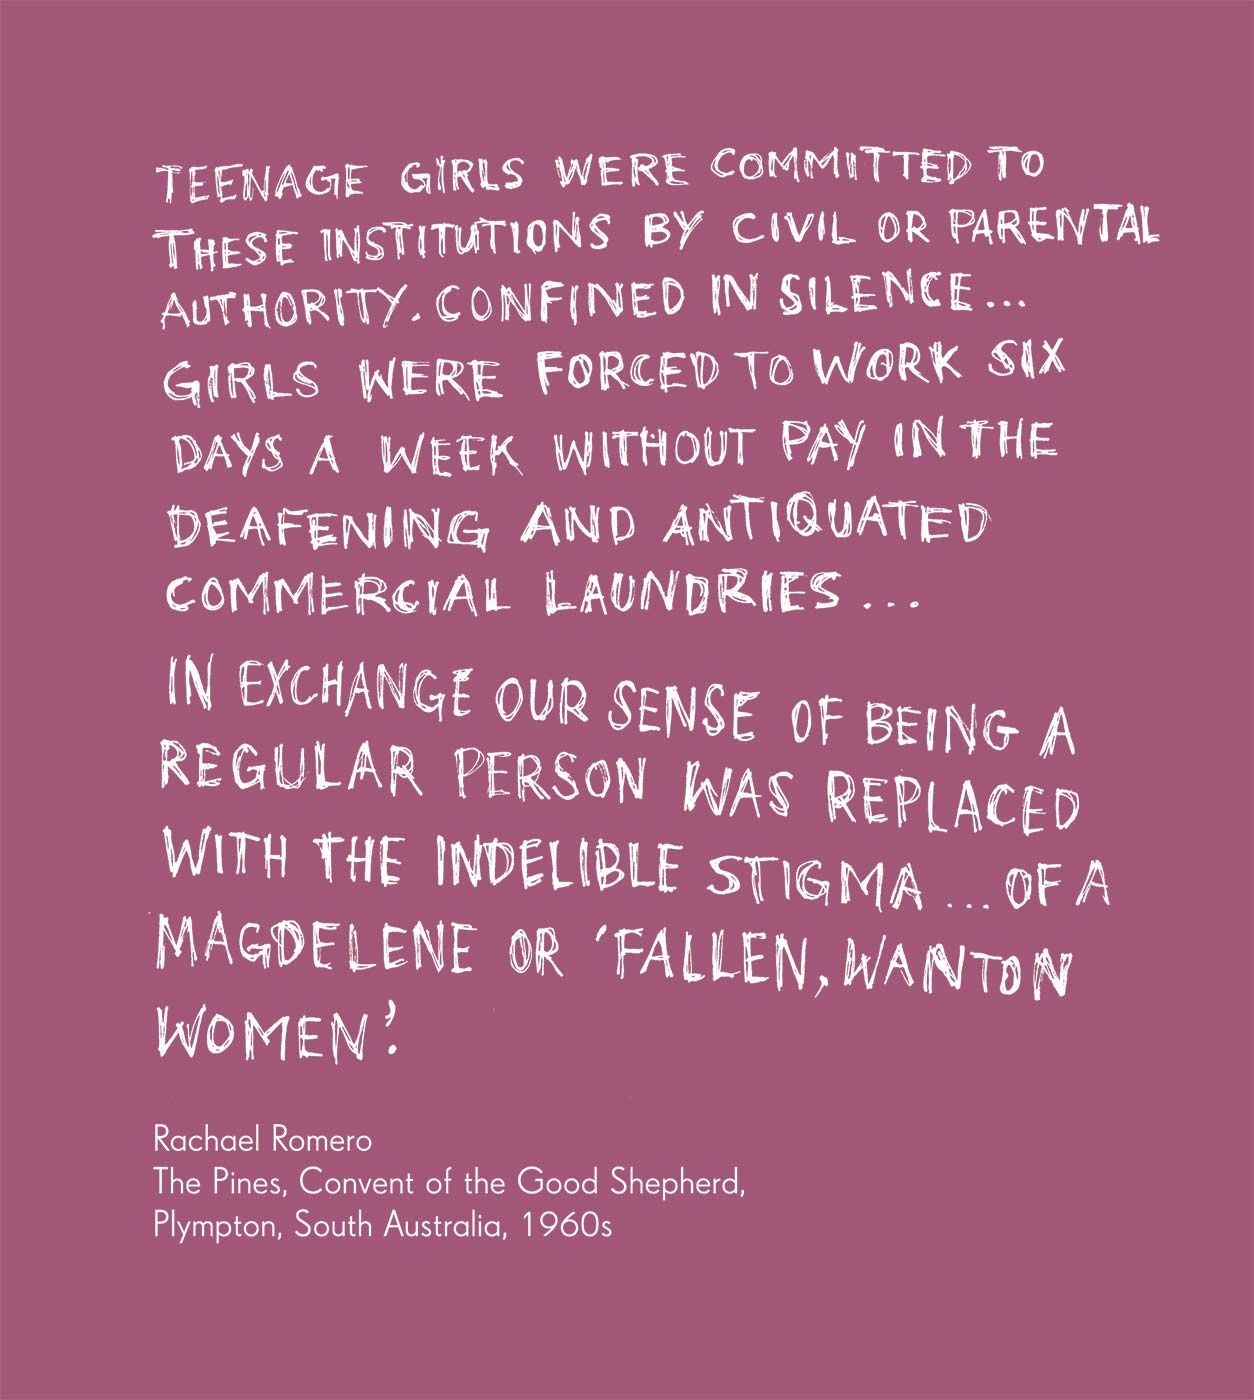 Exhibition graphic panel that reads: 'Teenage girls were committed to these institutions by civil or parental authority. Confined in silence ...  girls were forced to work six days a week without pay in the deafening and antiquated commercial laundries ... In exchange our sense of being a regular person was replaced with the indelible stigma ... of a Magdalene or ‘fallen, wanton women’, attributed to 'Rachael Romero, The Pines, Convent of the Good Shepherd, Plympton, South Australia, 1960s'. - click to view larger image